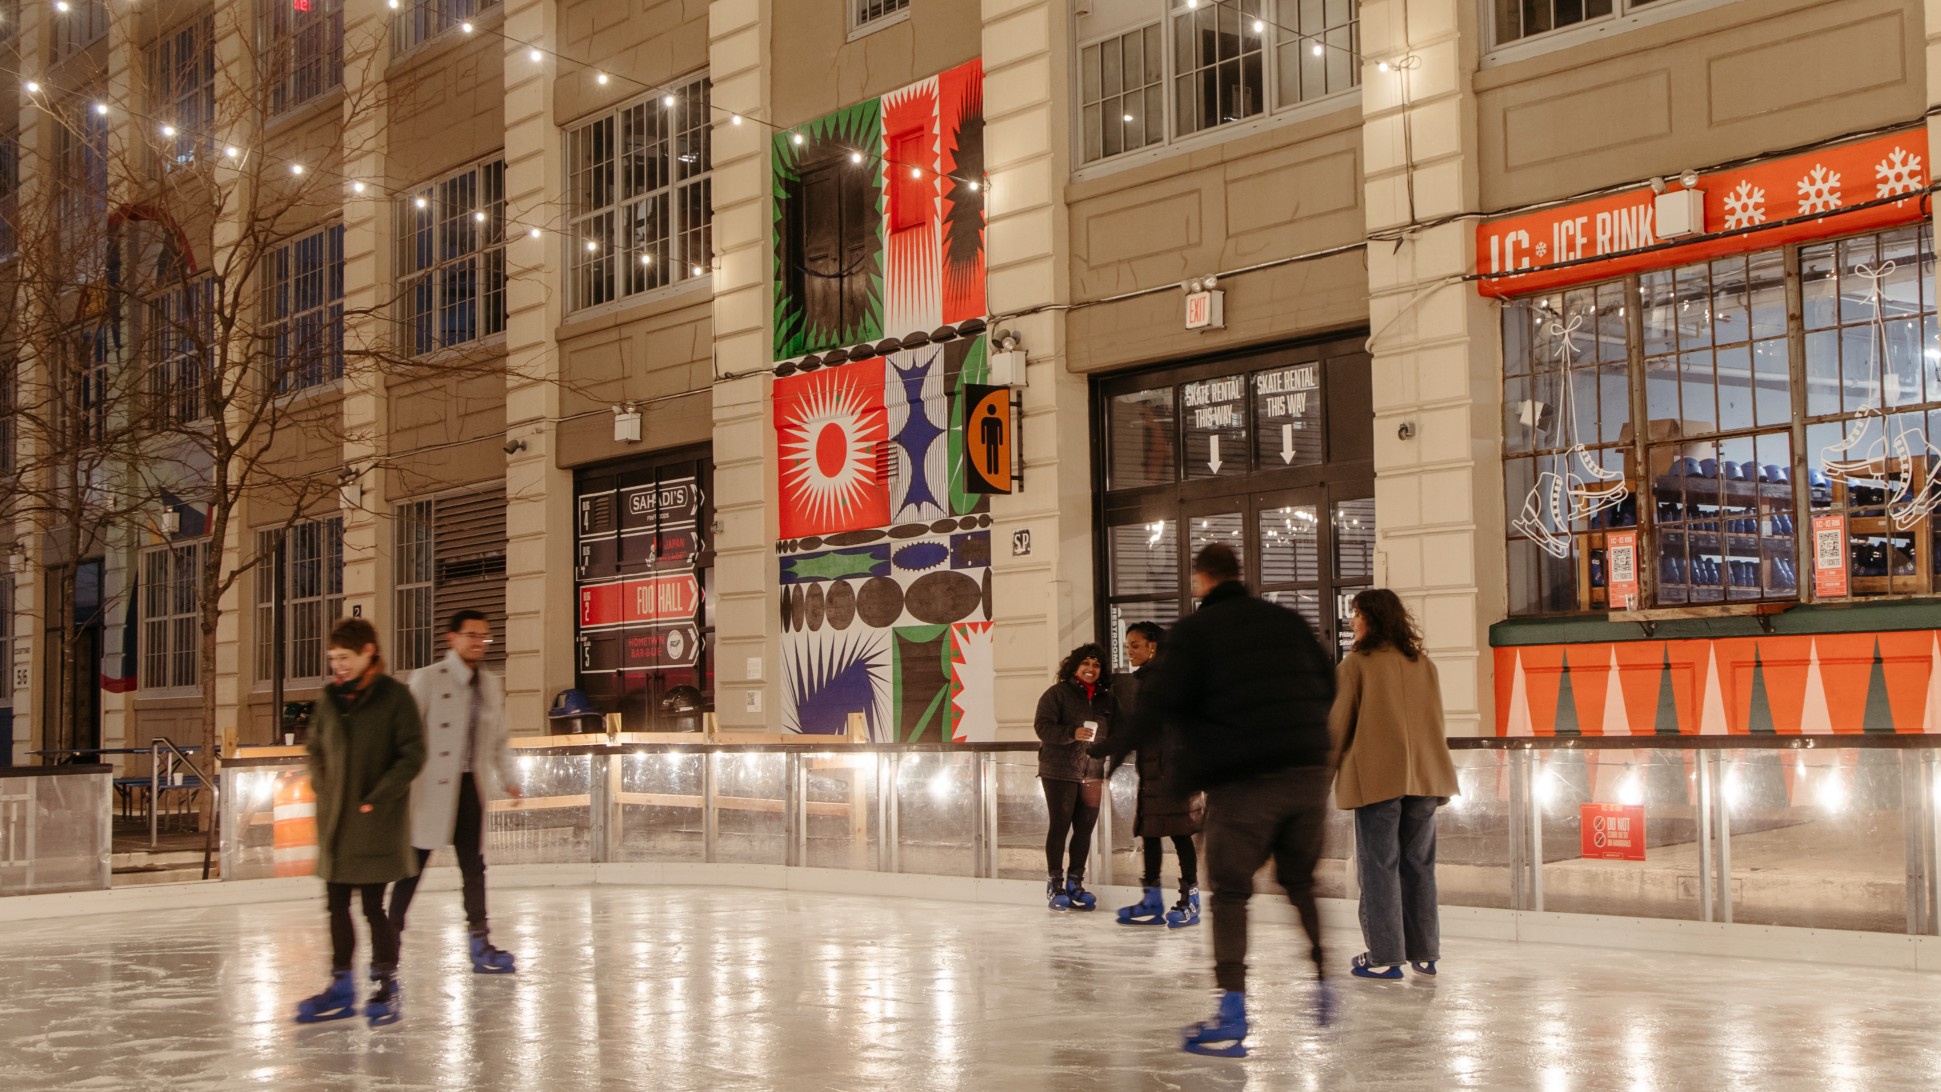 People ice skate outside at night.